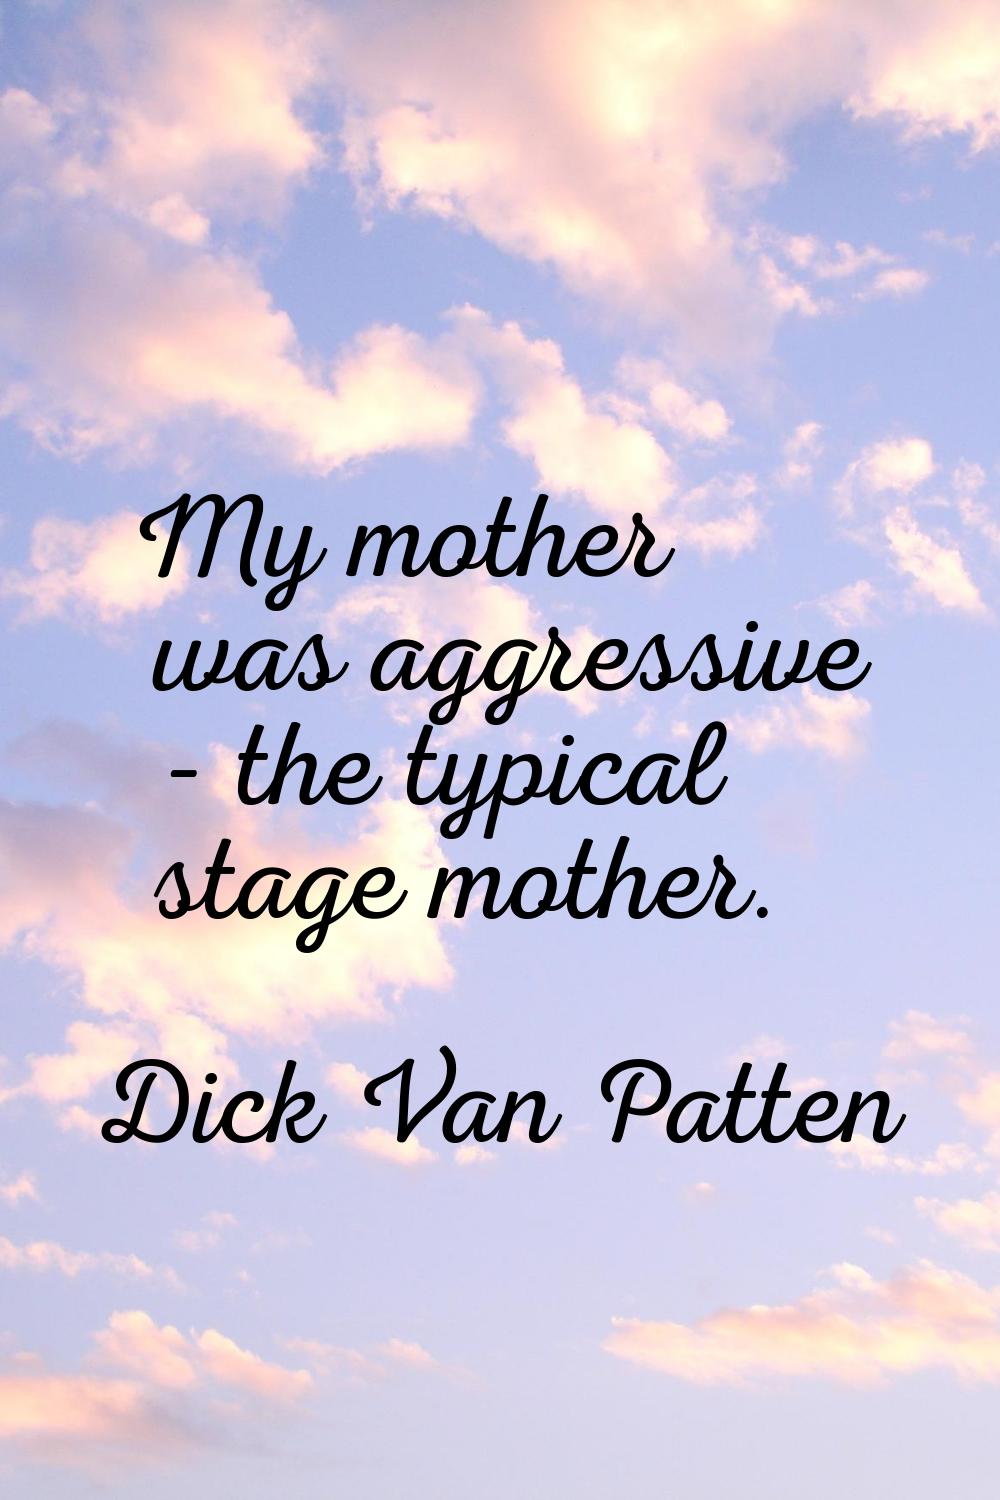 My mother was aggressive - the typical stage mother.